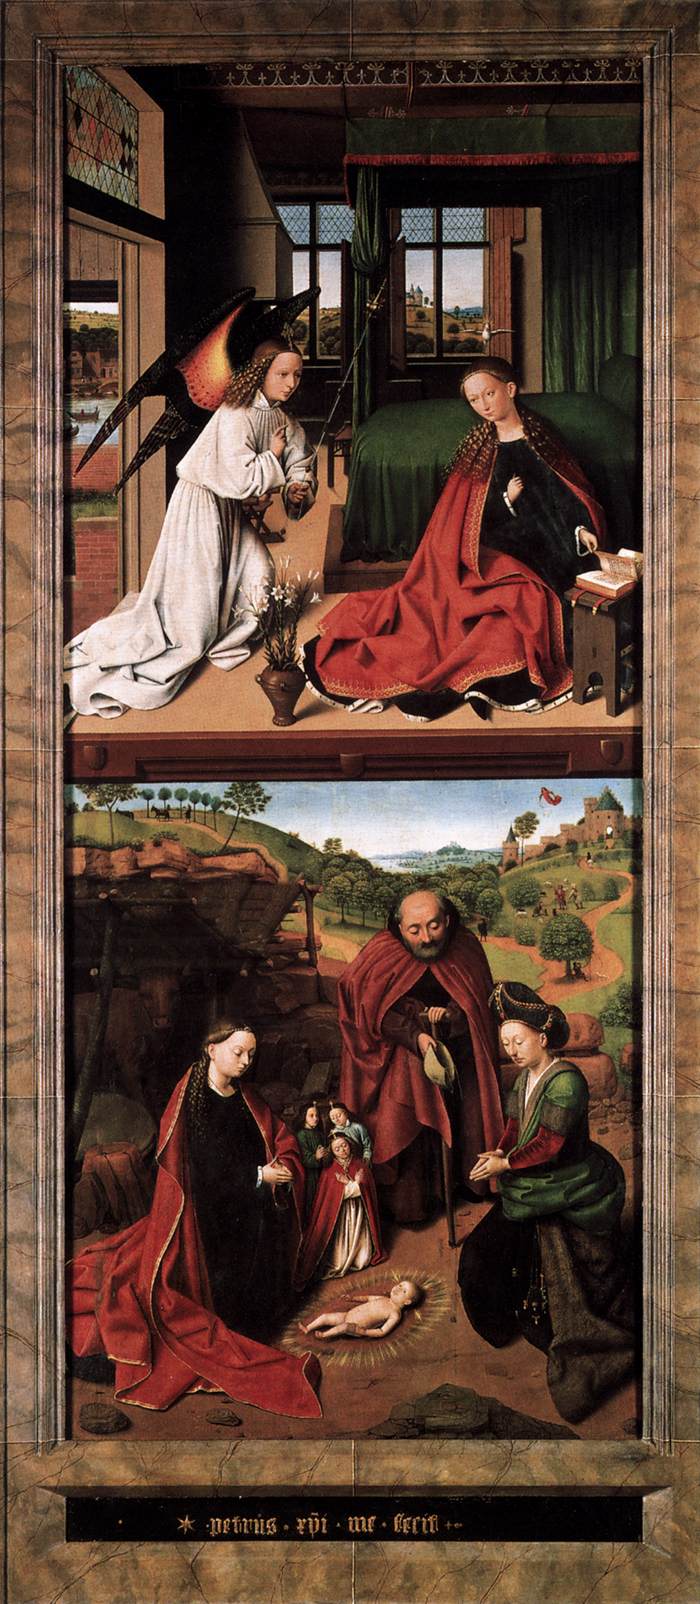 The Annunciation and the Nativity